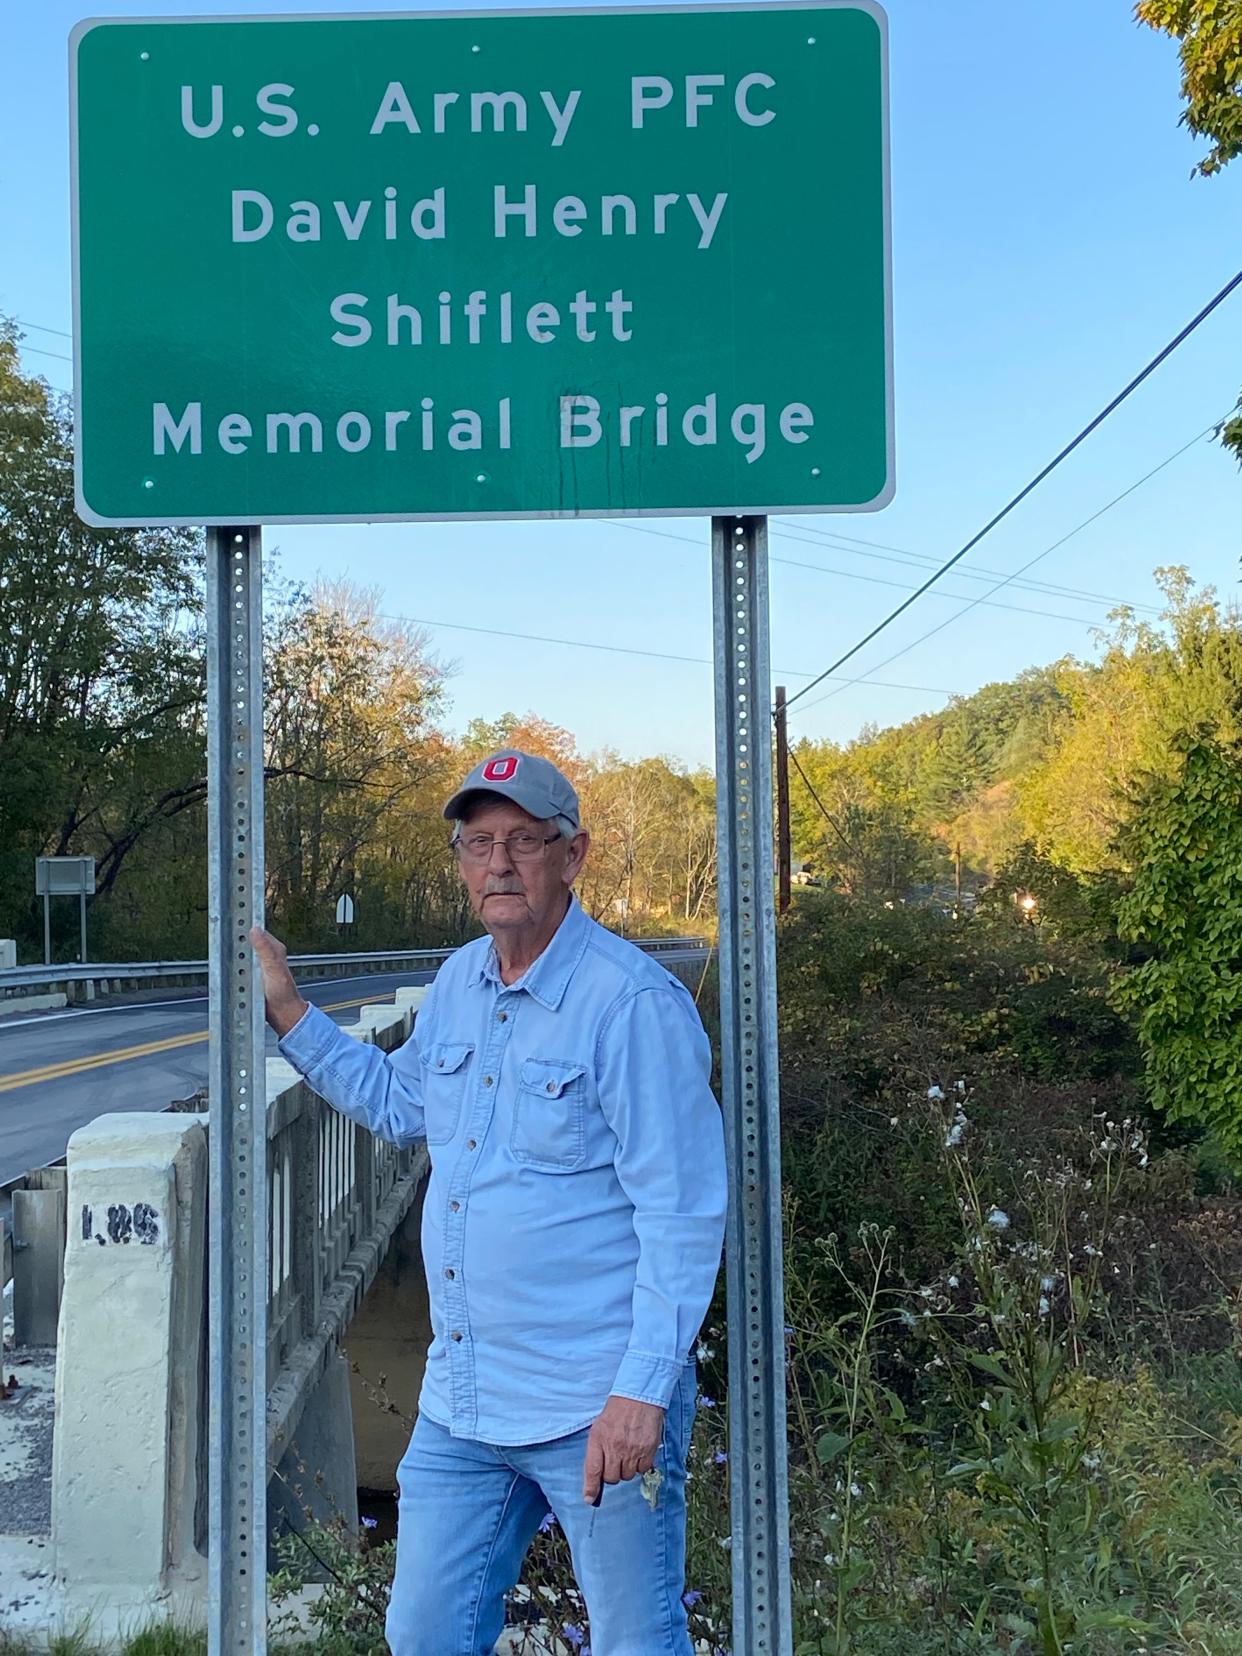 Dean Pace at the West Virginia bridge named in honor of his friend and fellow soldier.